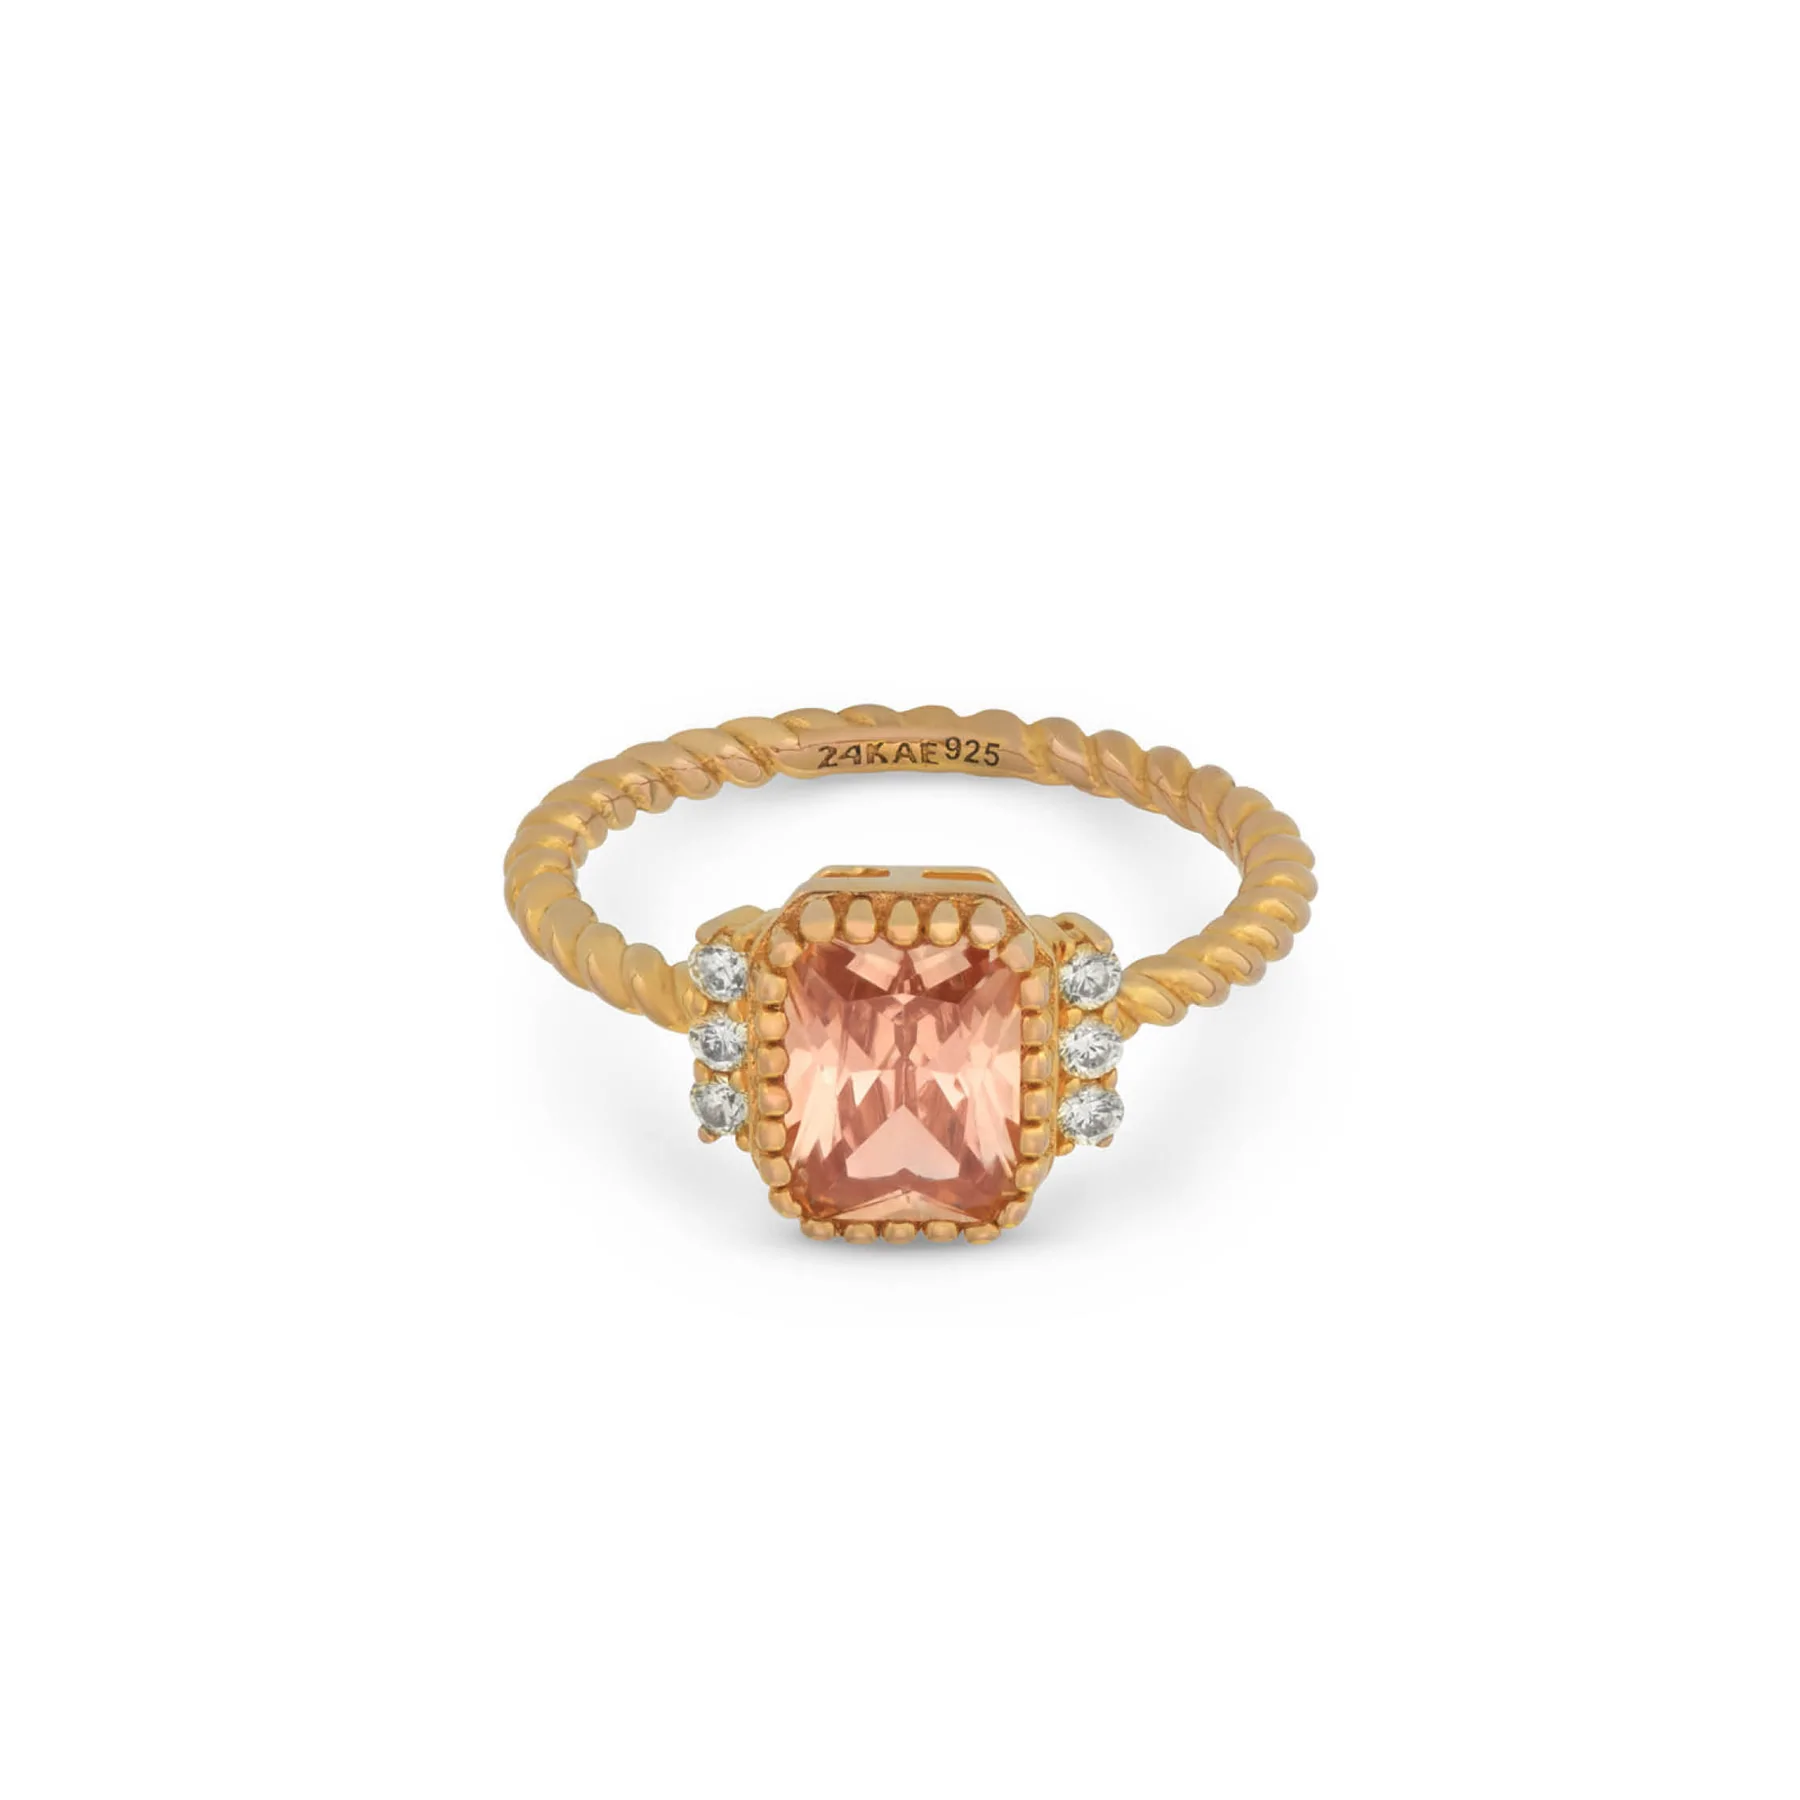 24Kae Gold Rope Ring with Peach Stone